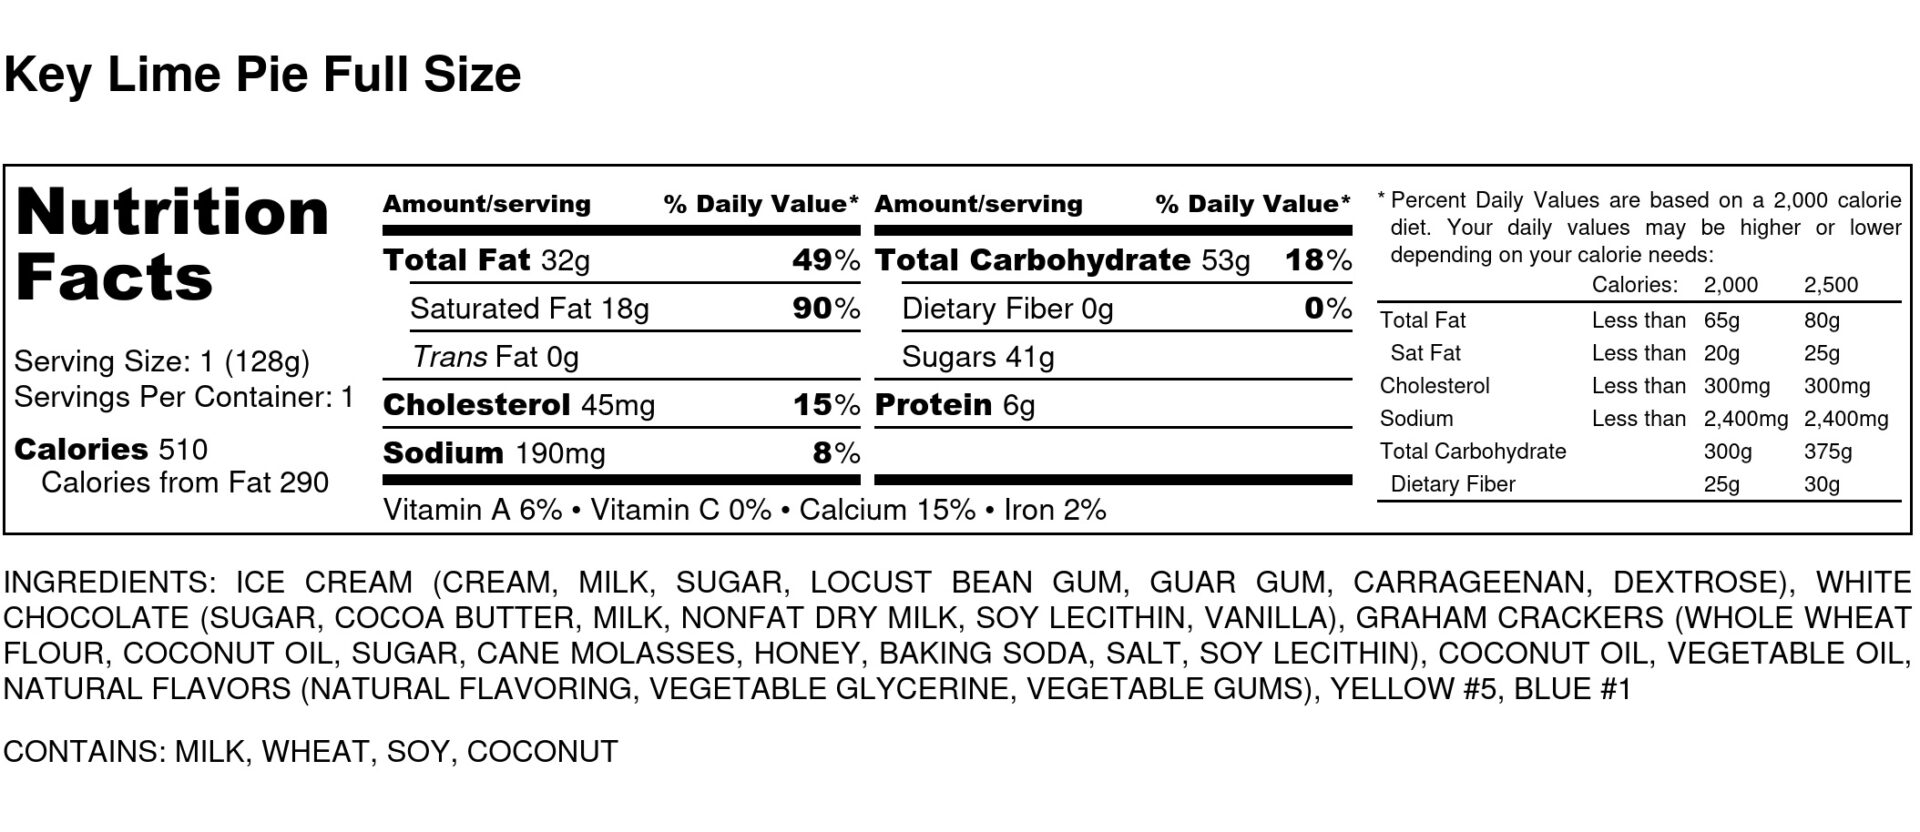 Key Lime Pie Full Size Nutrition Label scaled